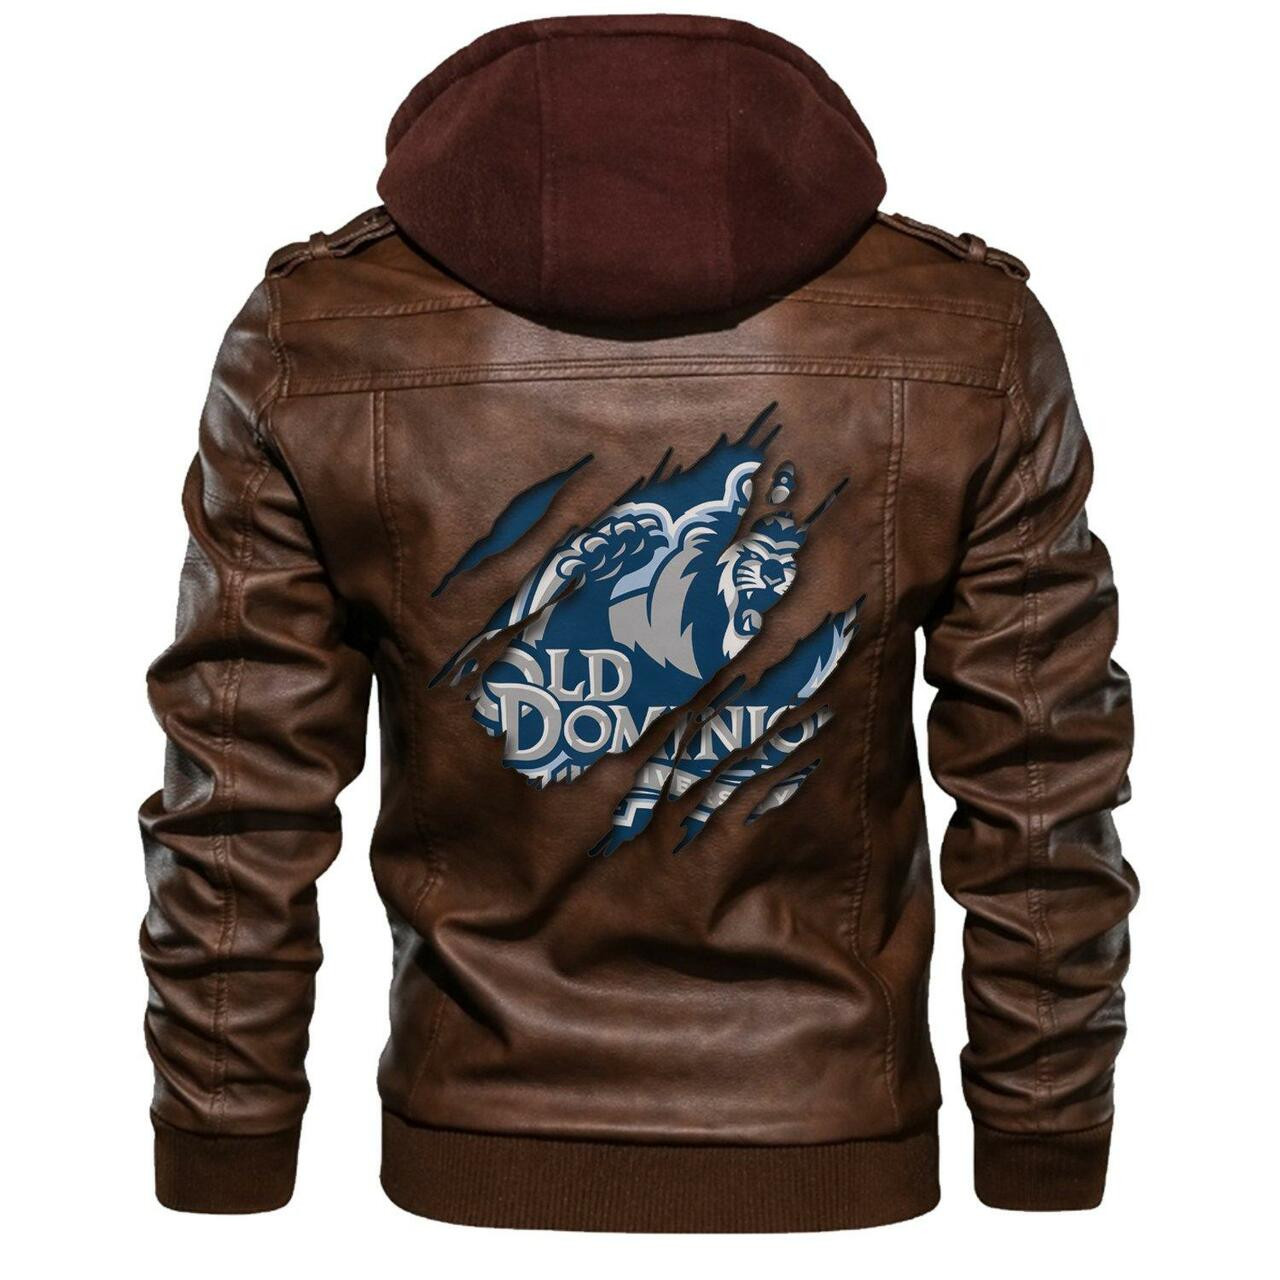 Check out and find the right leather jacket below 257